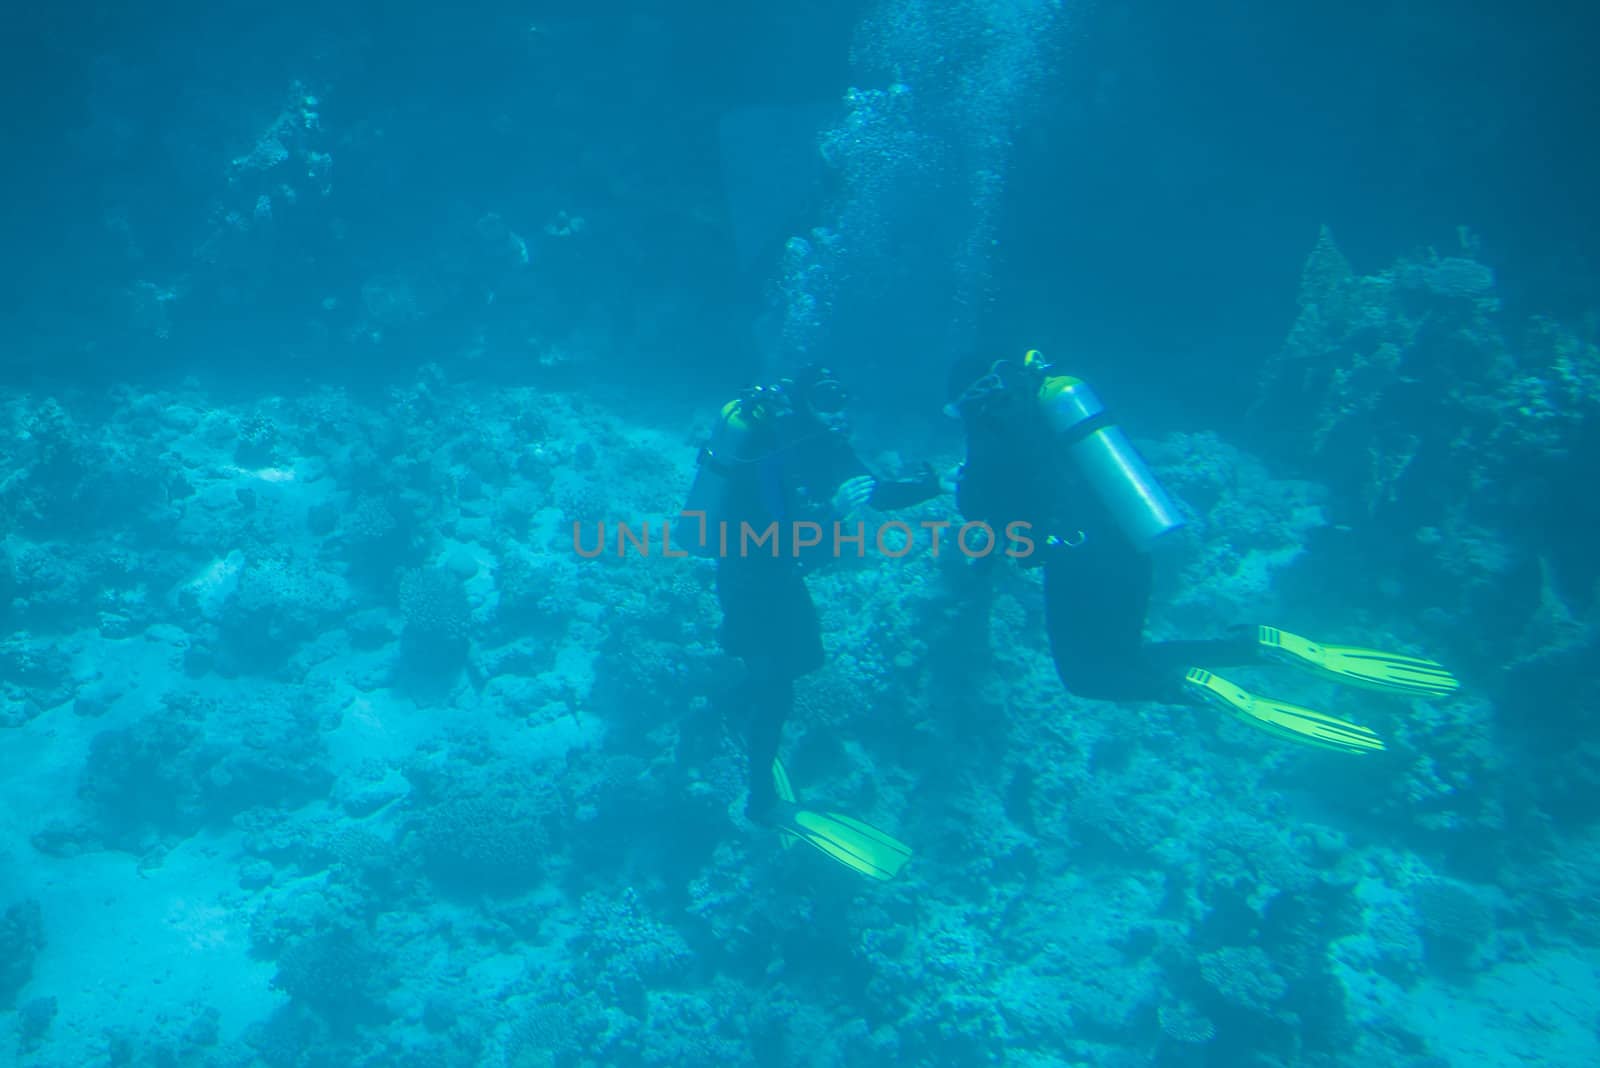 The picture is shot from a semi-submarine at the coral reefs in the bay at Sharm el Sheikh, Egypt a day in April 2013.